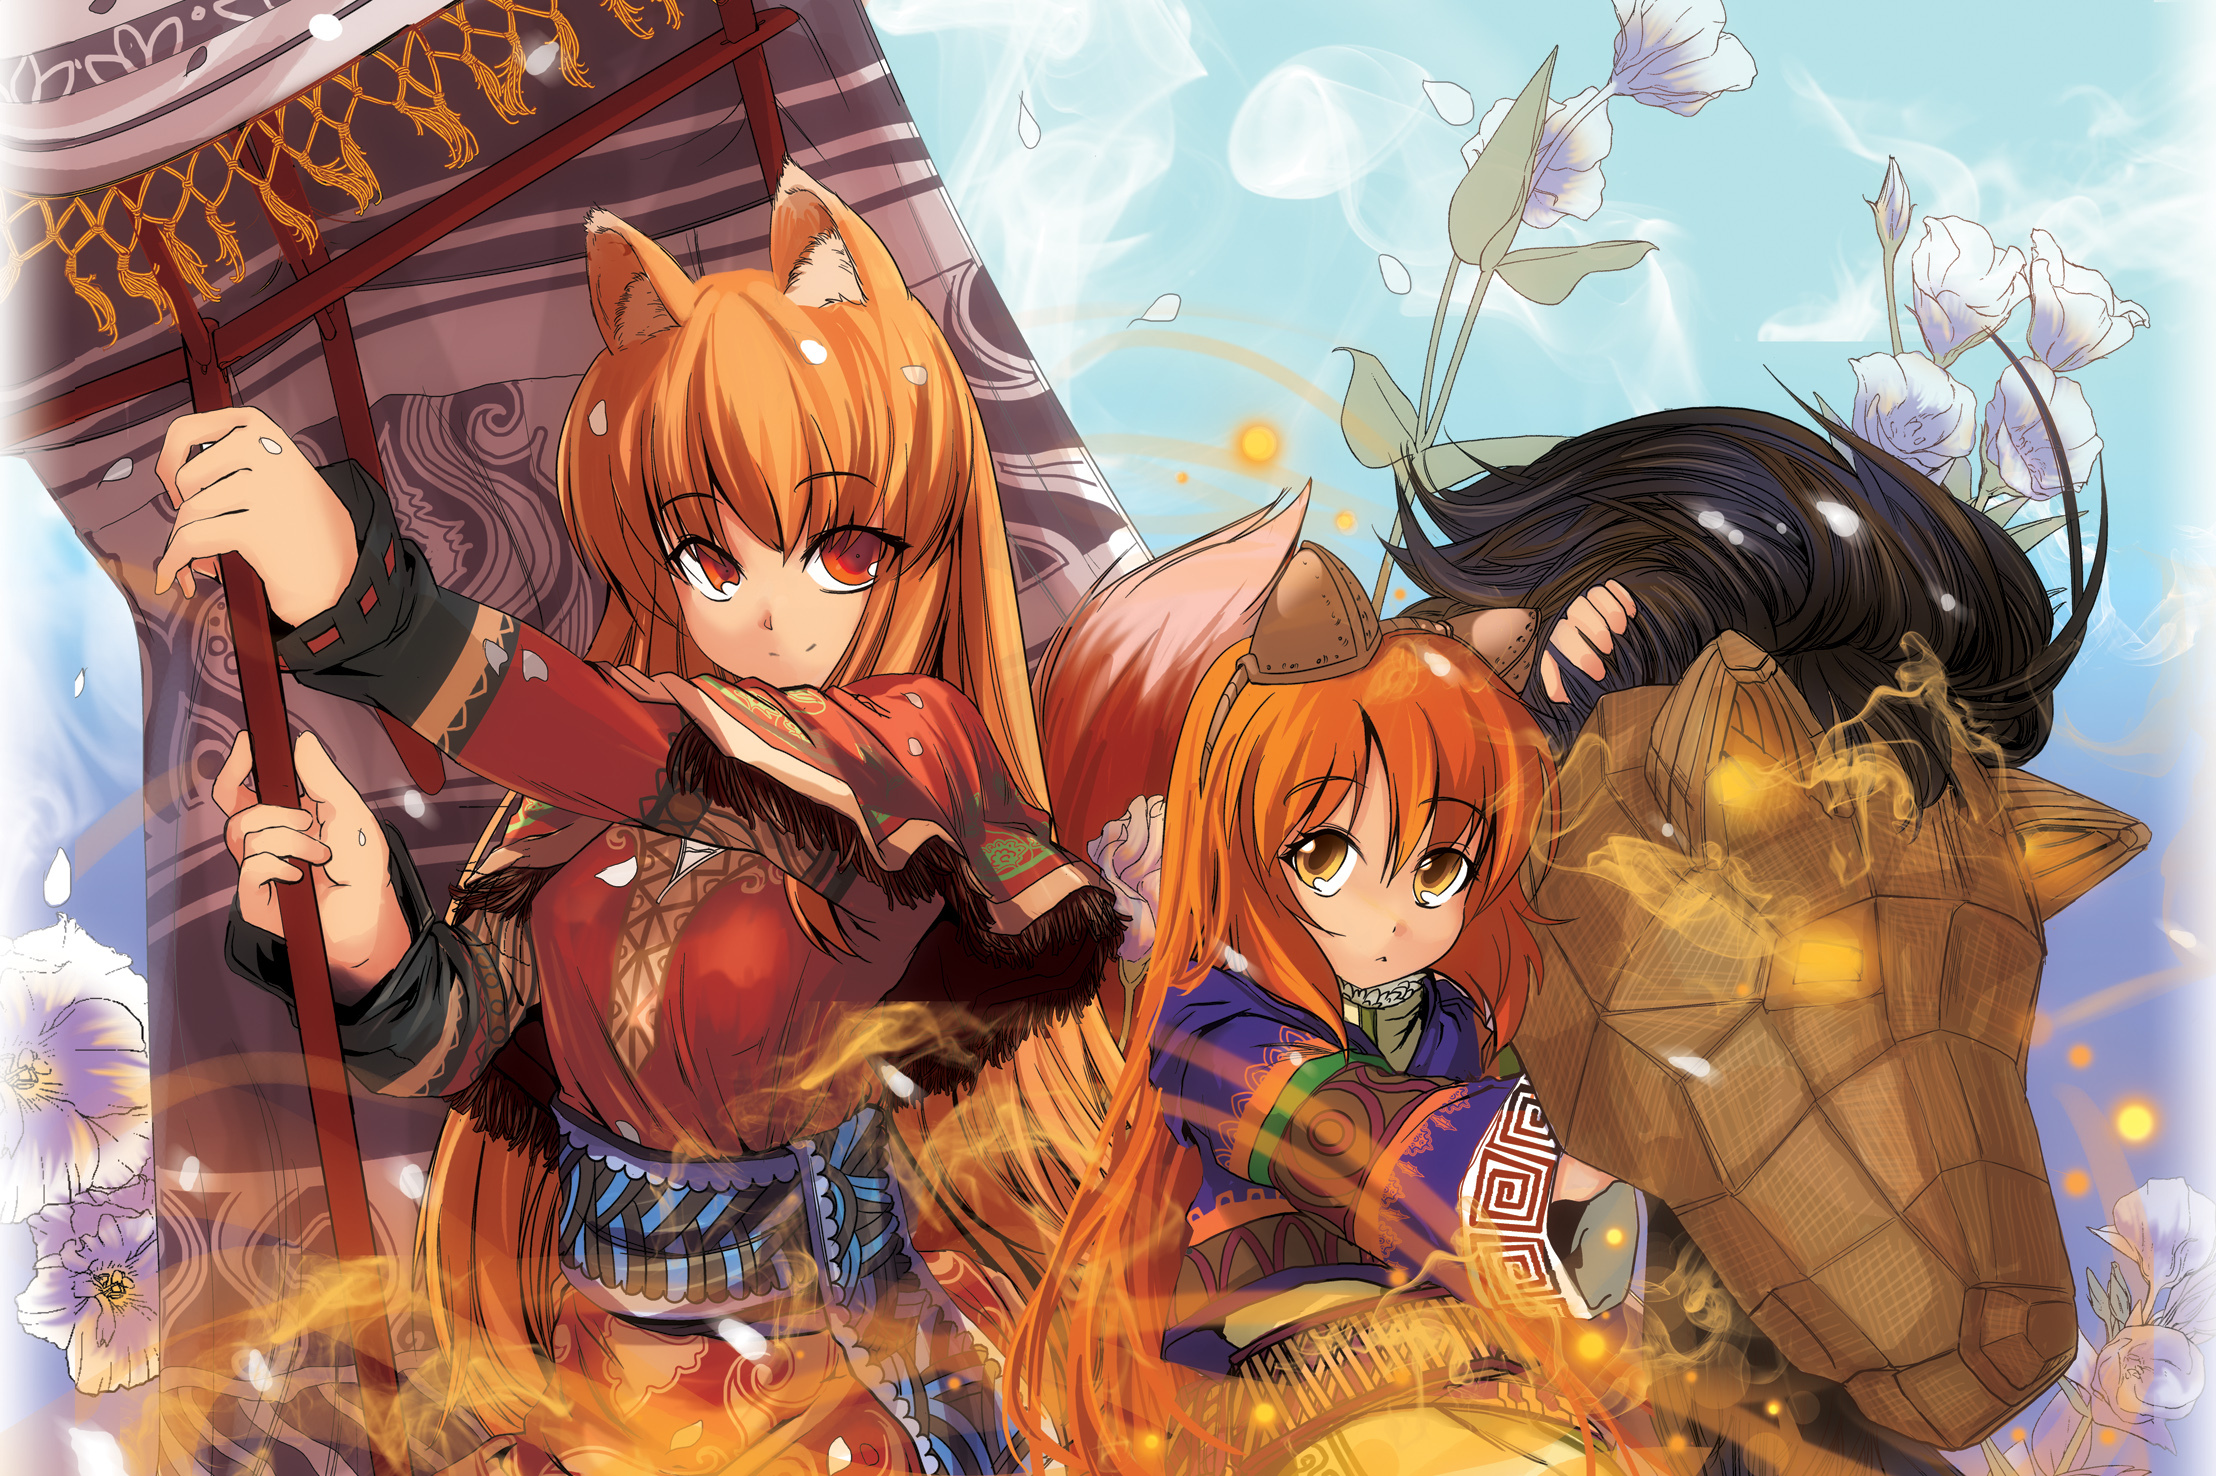 Anime Spice And Wolf Hd Wallpaper